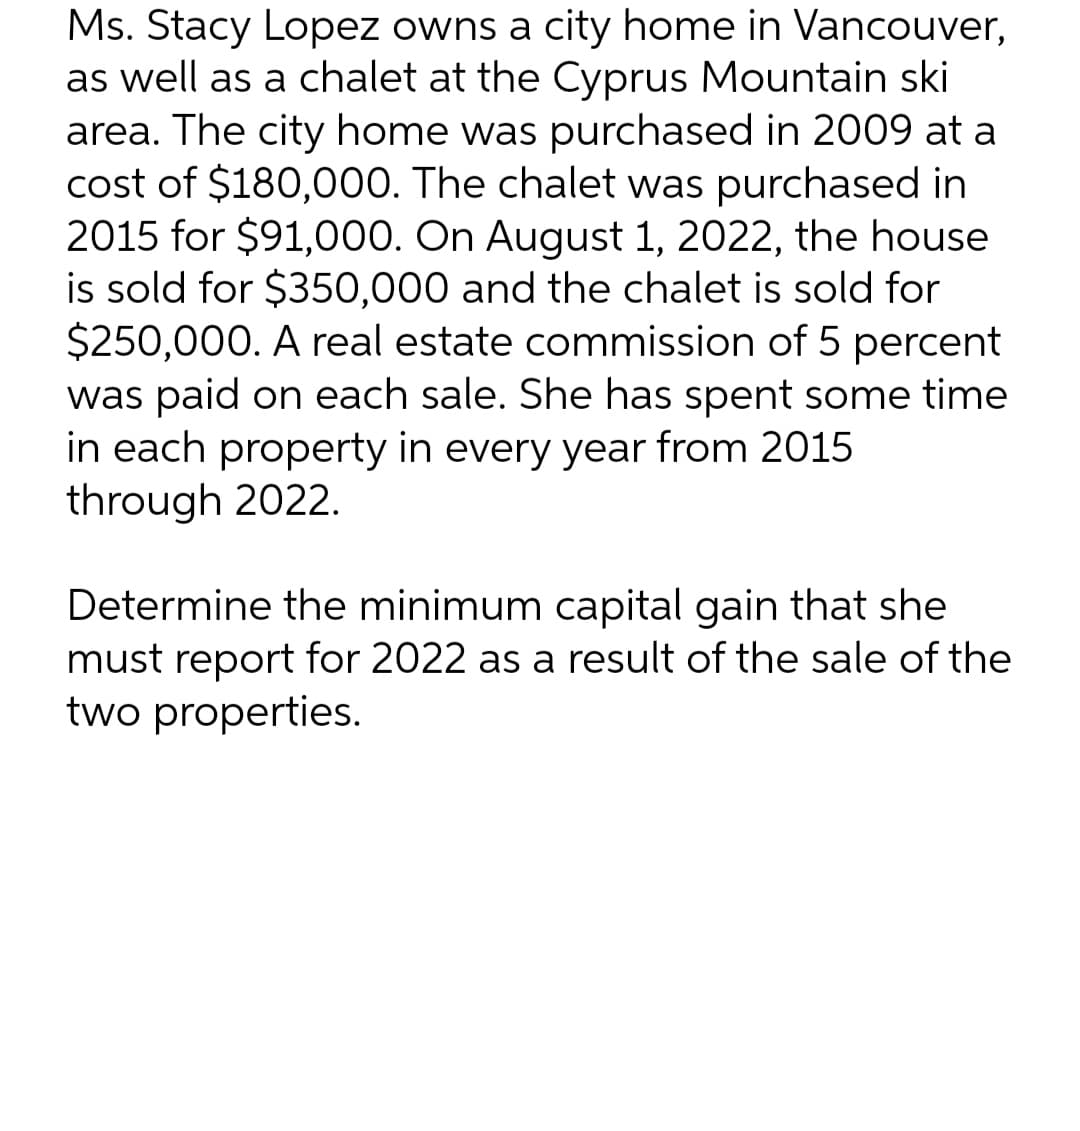 Ms. Stacy Lopez owns a city home in Vancouver,
as well as a chalet at the Cyprus Mountain ski
area. The city home was purchased in 2009 at a
cost of $180,000. The chalet was purchased in
2015 for $91,000. On August 1, 2022, the house
is sold for $350,000 and the chalet is sold for
$250,000. A real estate commission of 5 percent
was paid on each sale. She has spent some time
in each property in every year from 2015
through 2022.
Determine the minimum capital gain that she
must report for 2022 as a result of the sale of the
two properties.